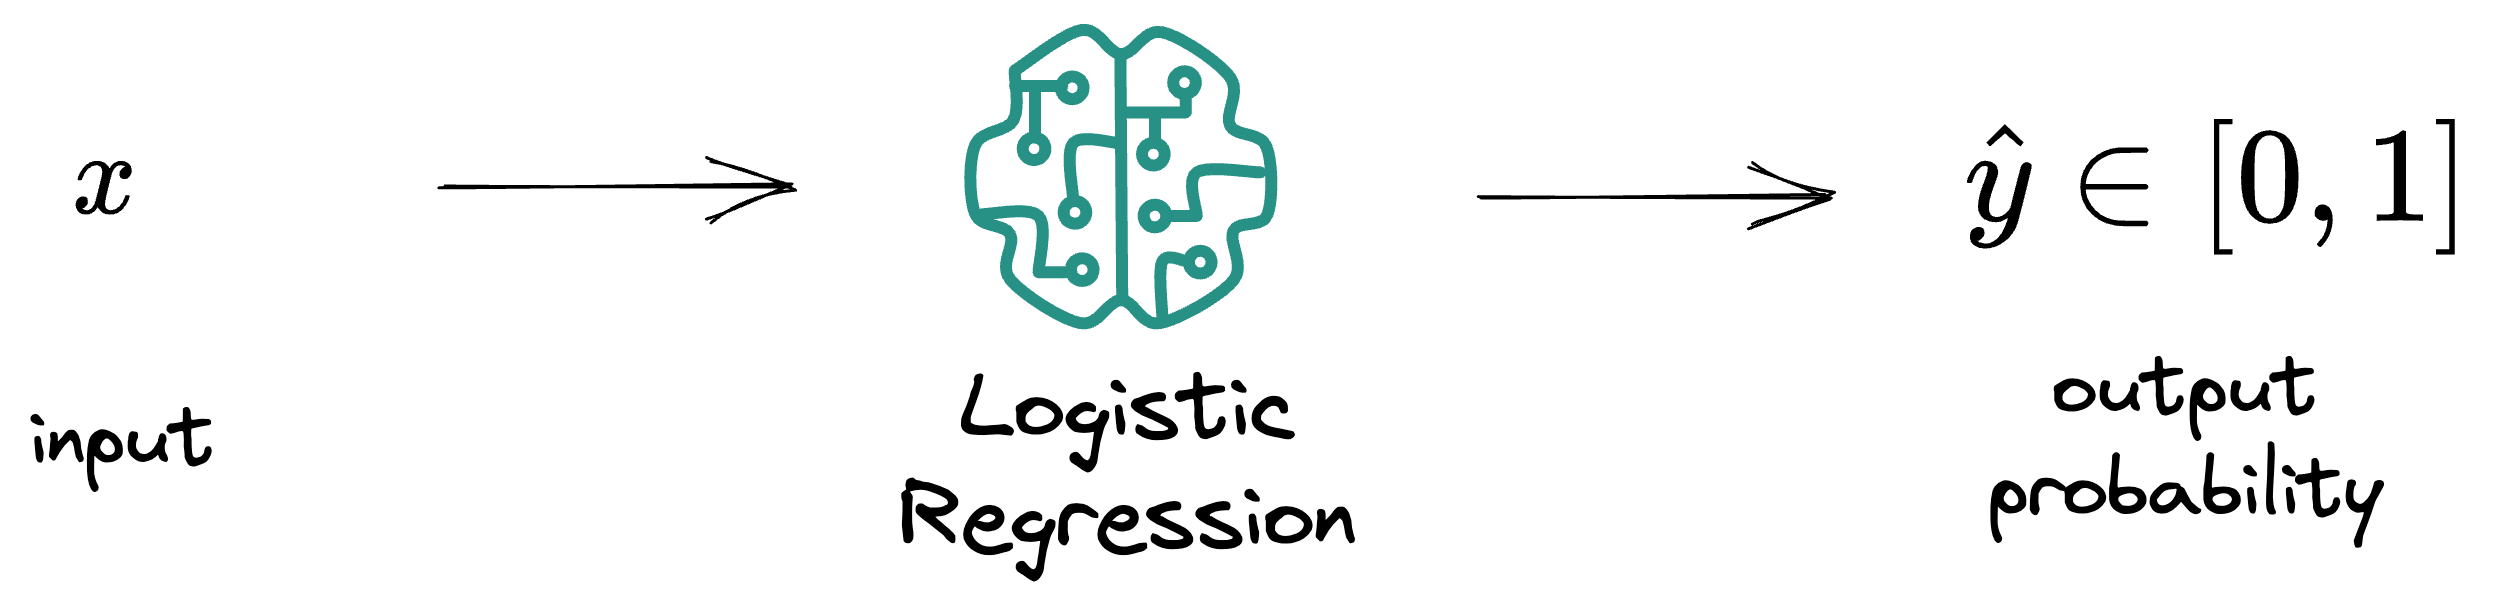 Why Sklearn’s Logistic Regression Has no Learning Rate Hyperparameter?